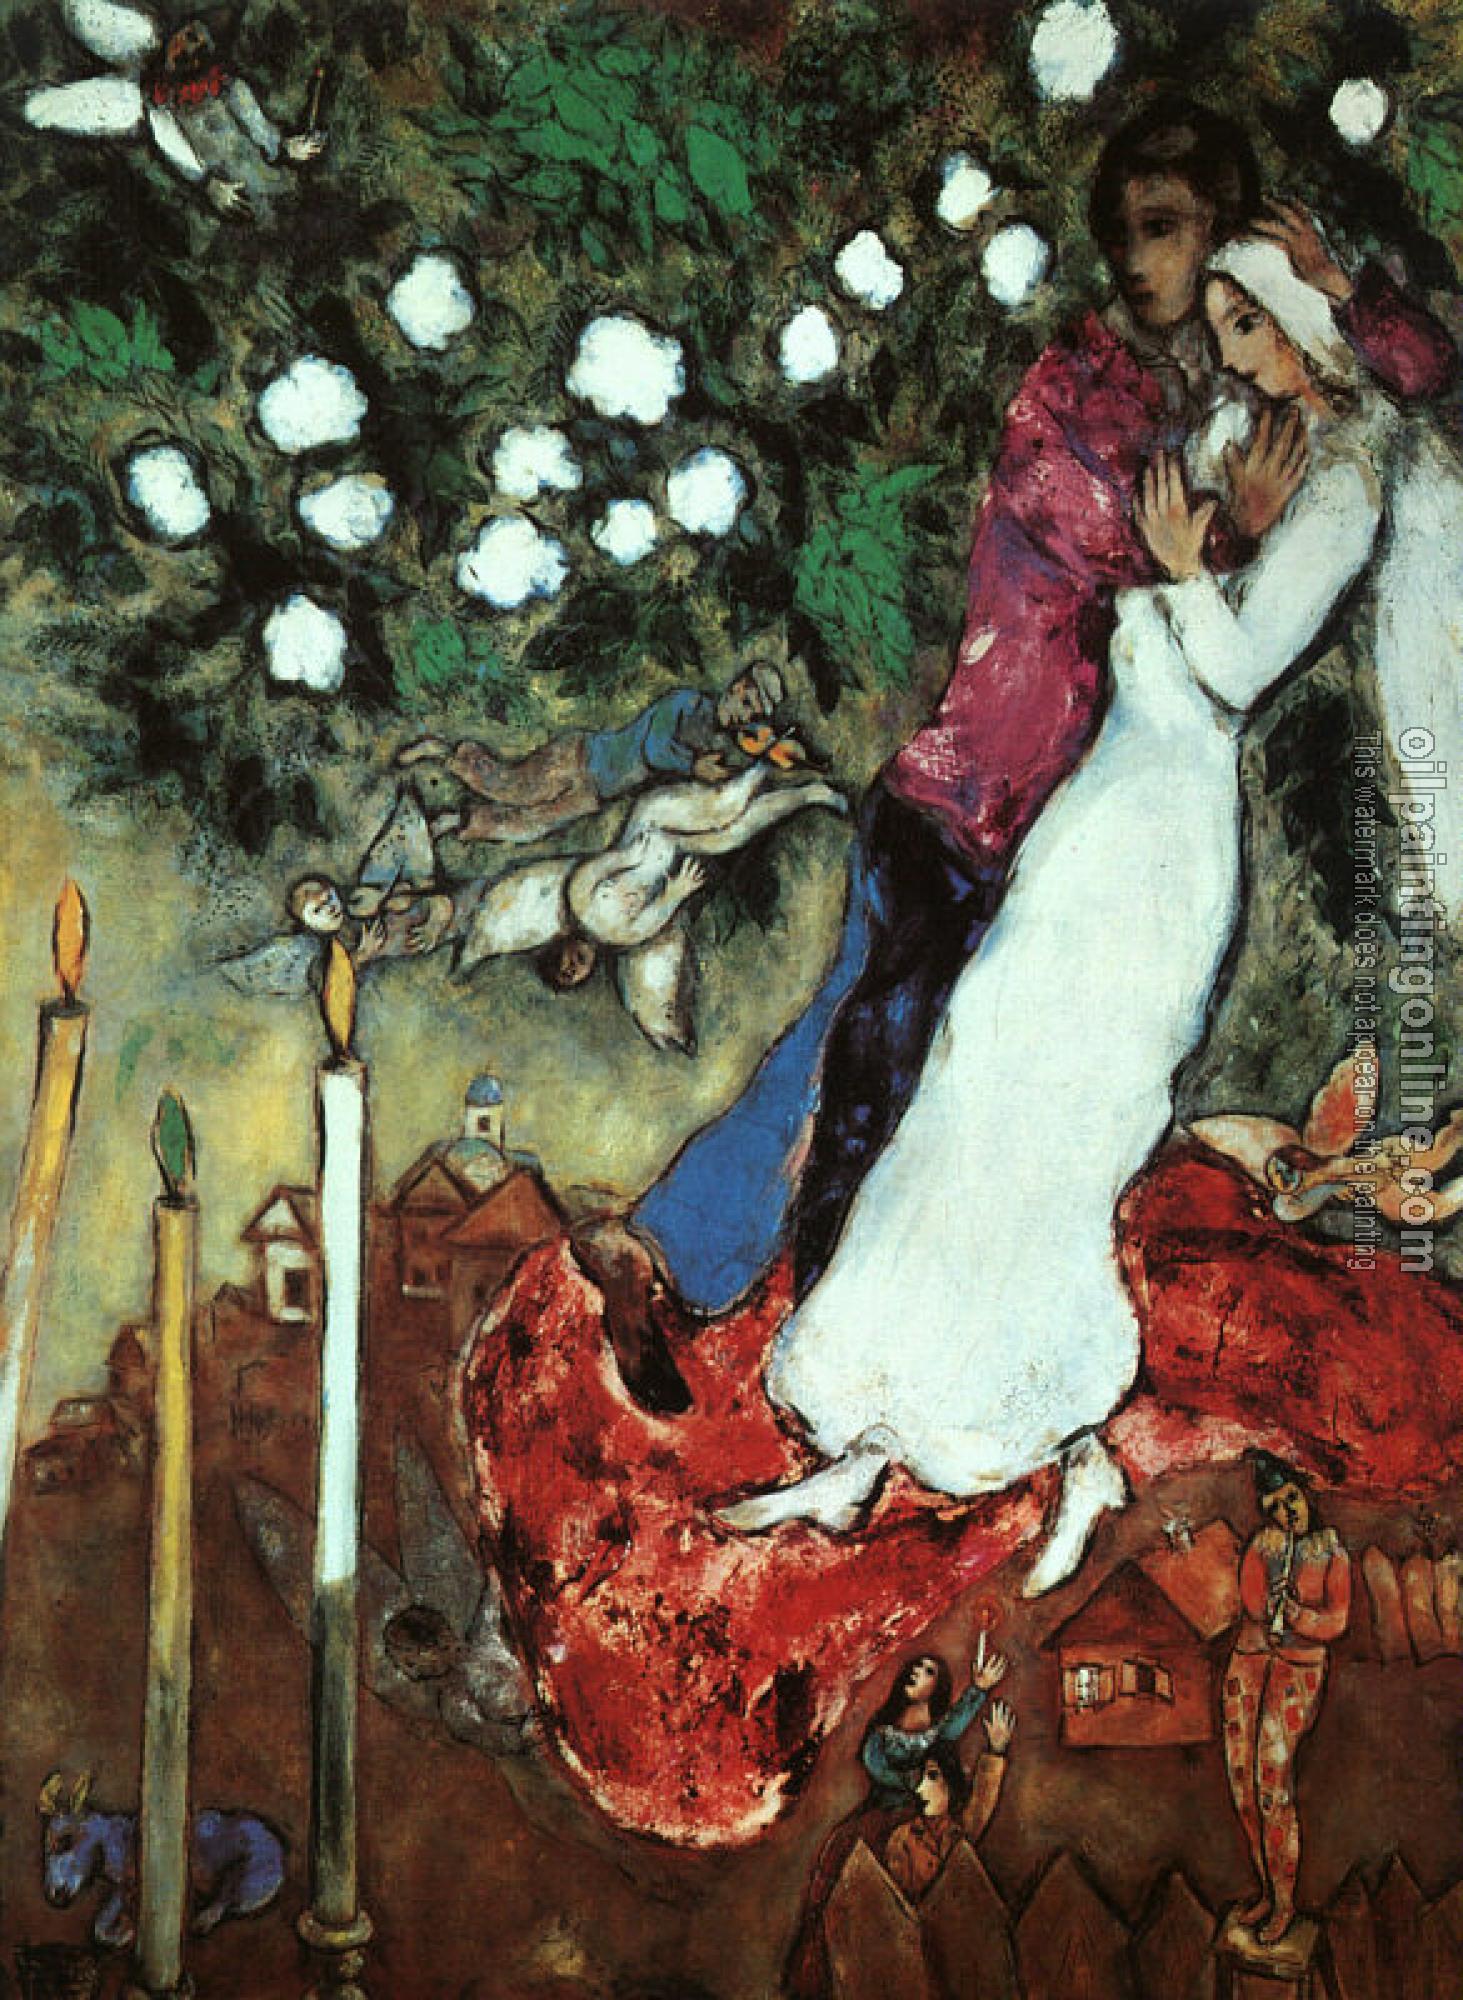 Chagall, Marc - The Three Candles